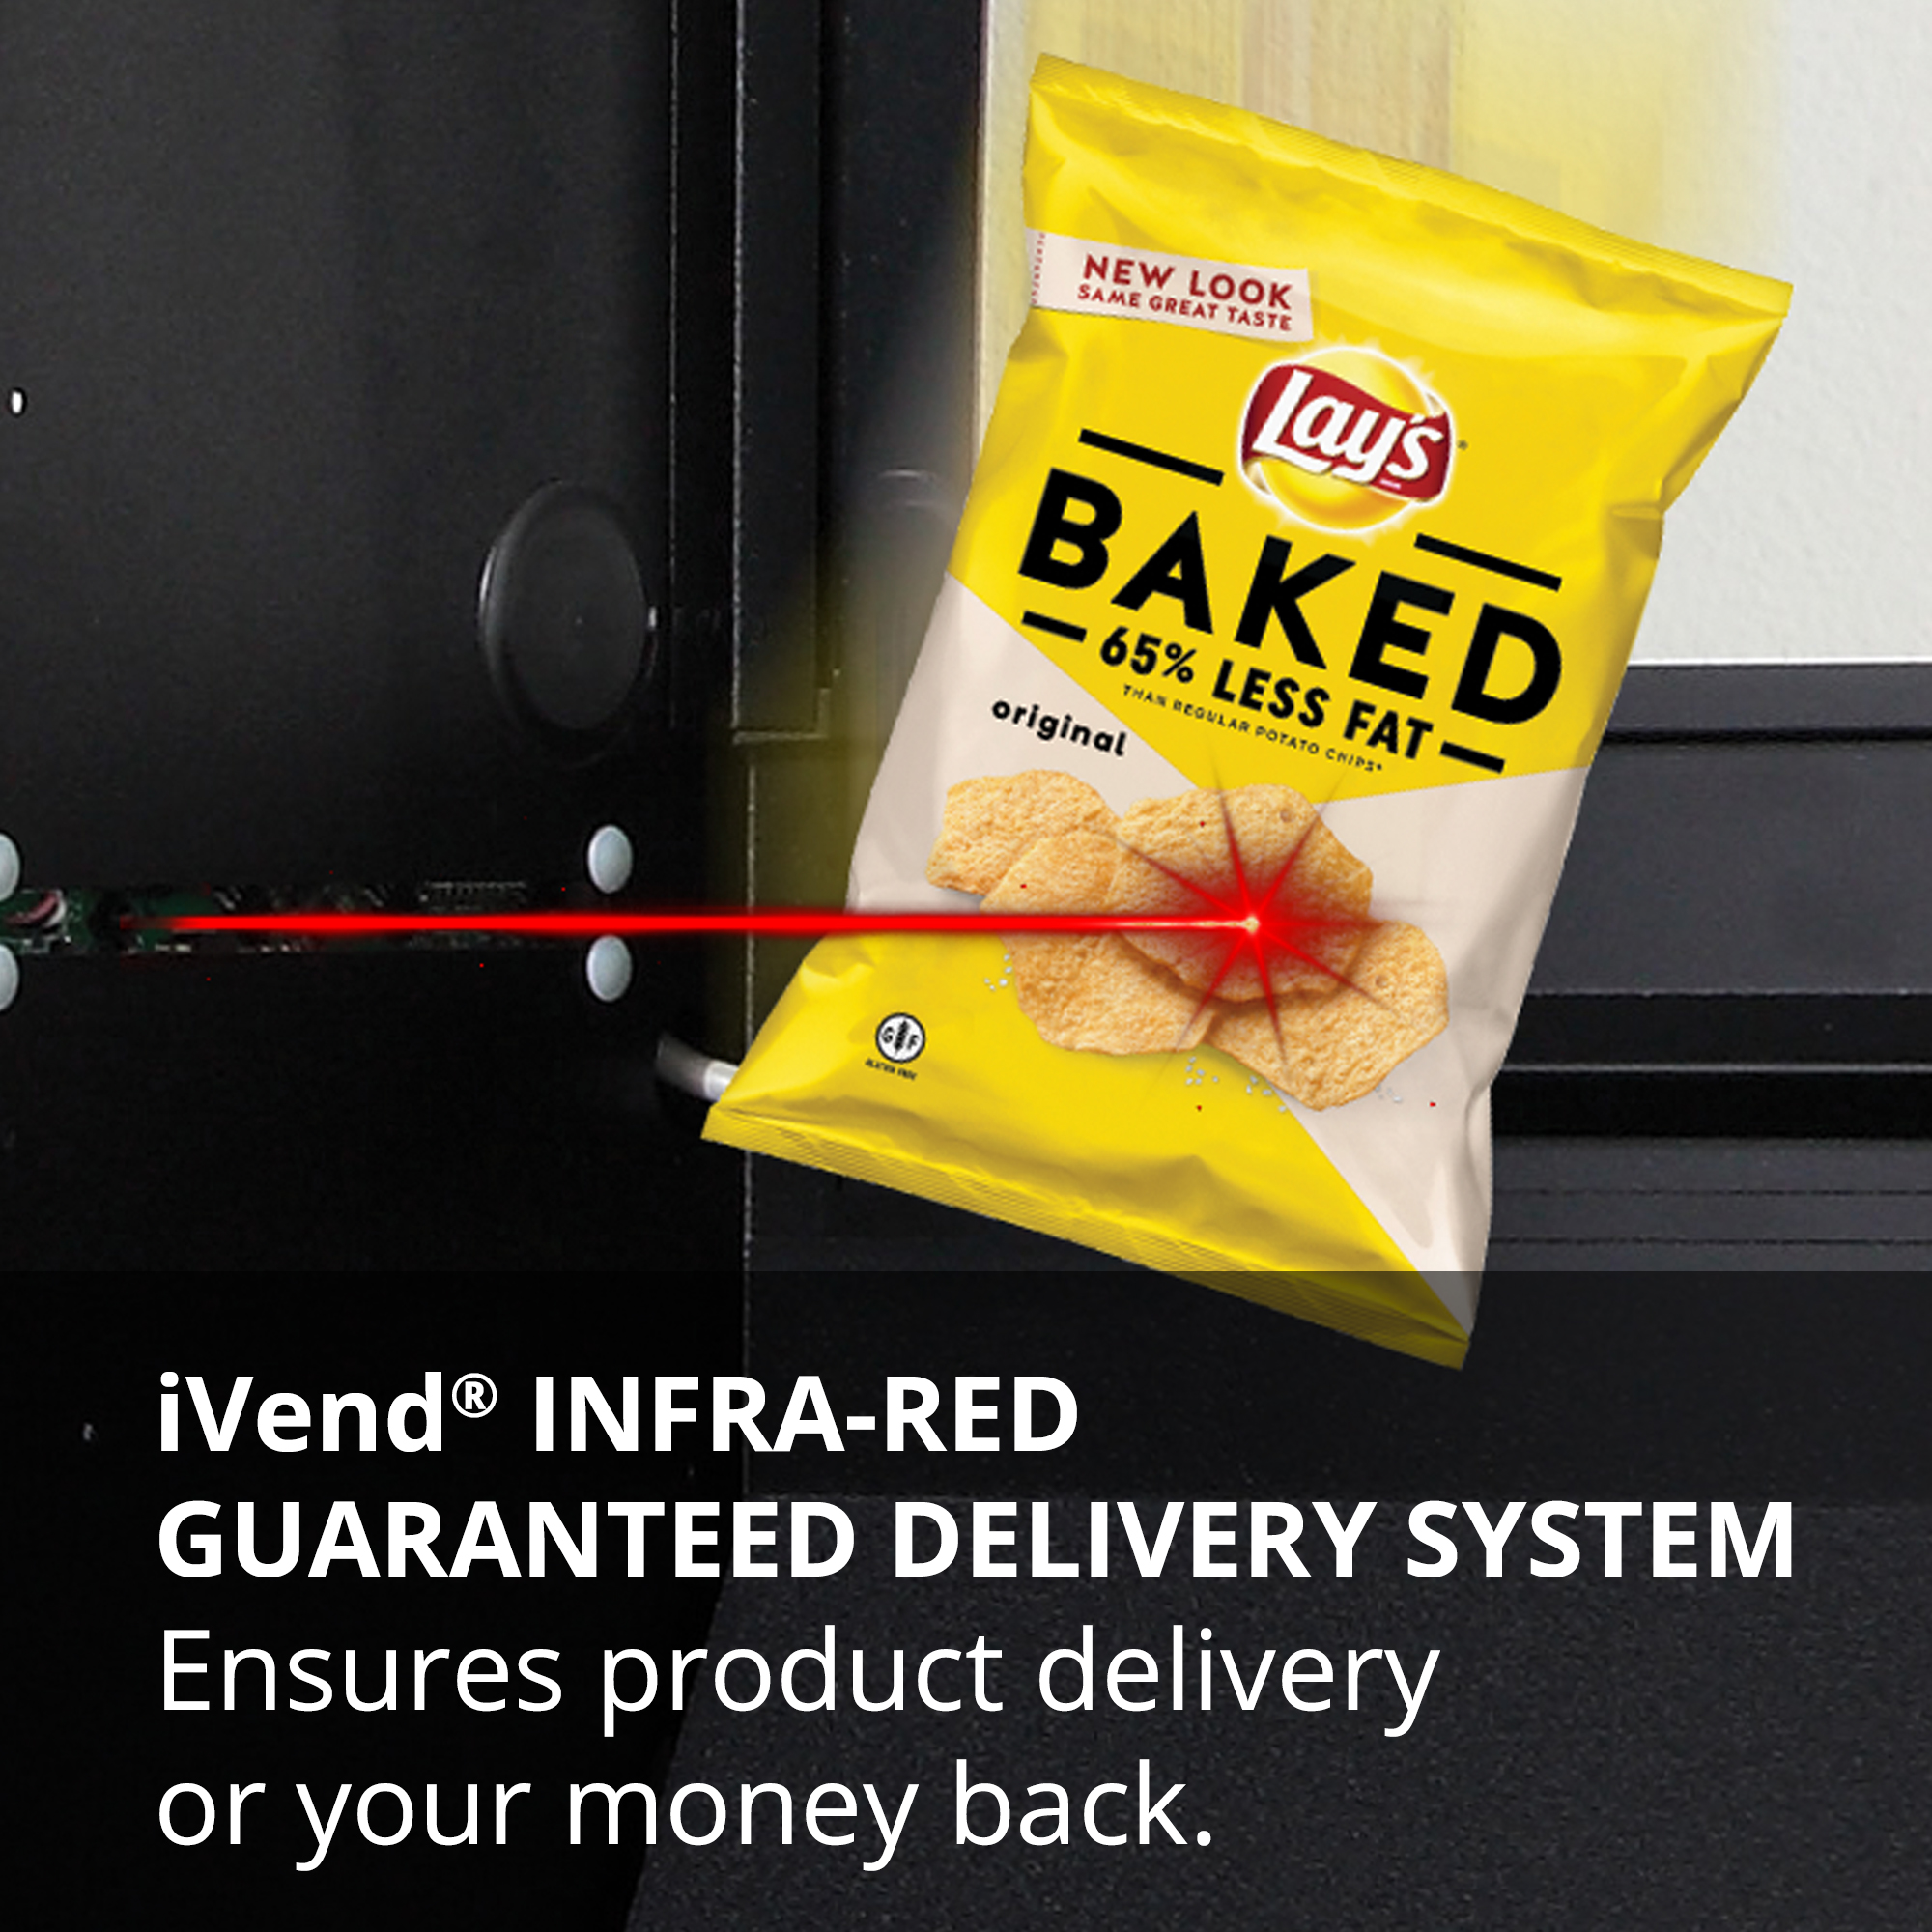 Baked Lay's passing through iVend Infrared Guaranteed Delivery System from Selectivend.